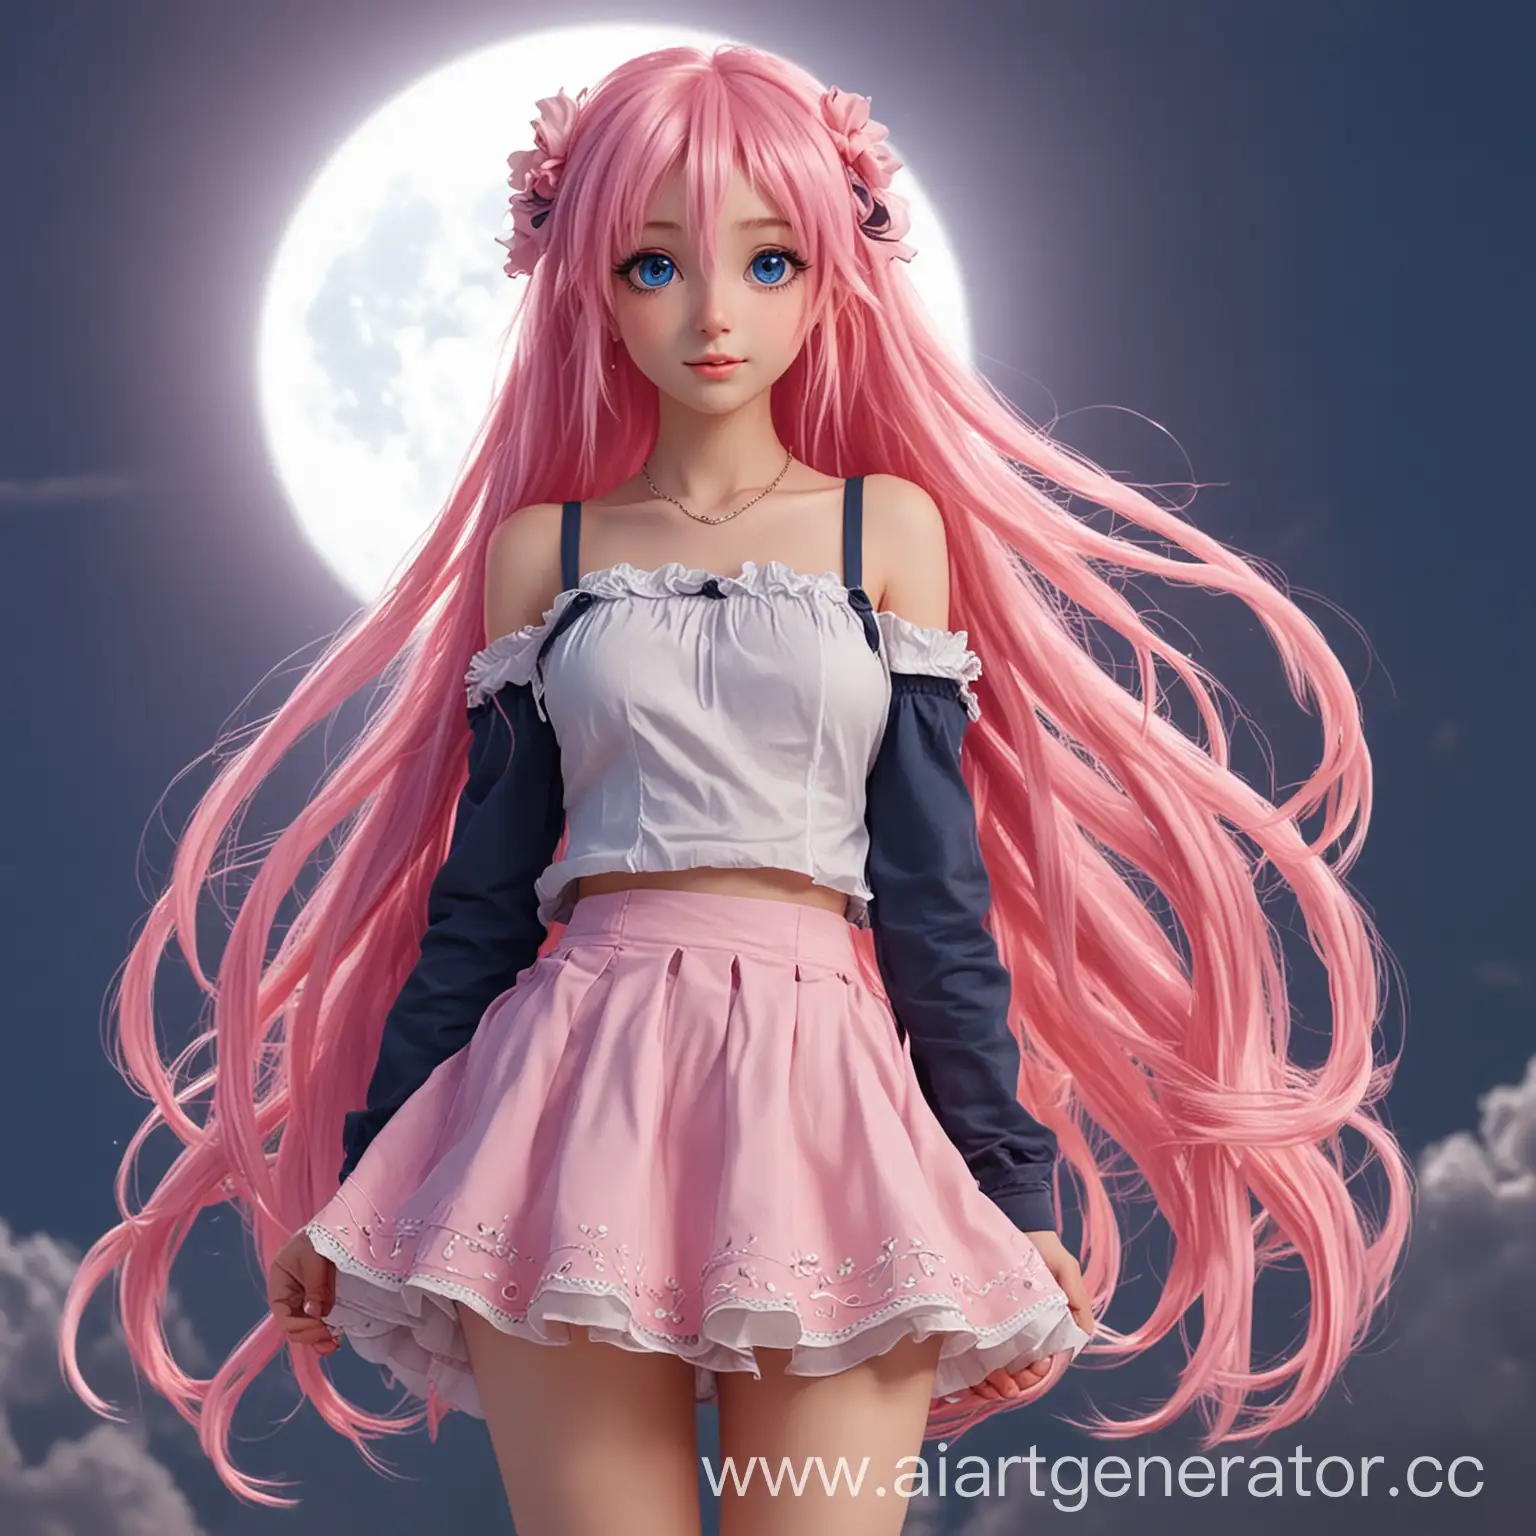 Mystical-Anime-Girl-with-Pink-Hair-Dancing-under-Moonlight